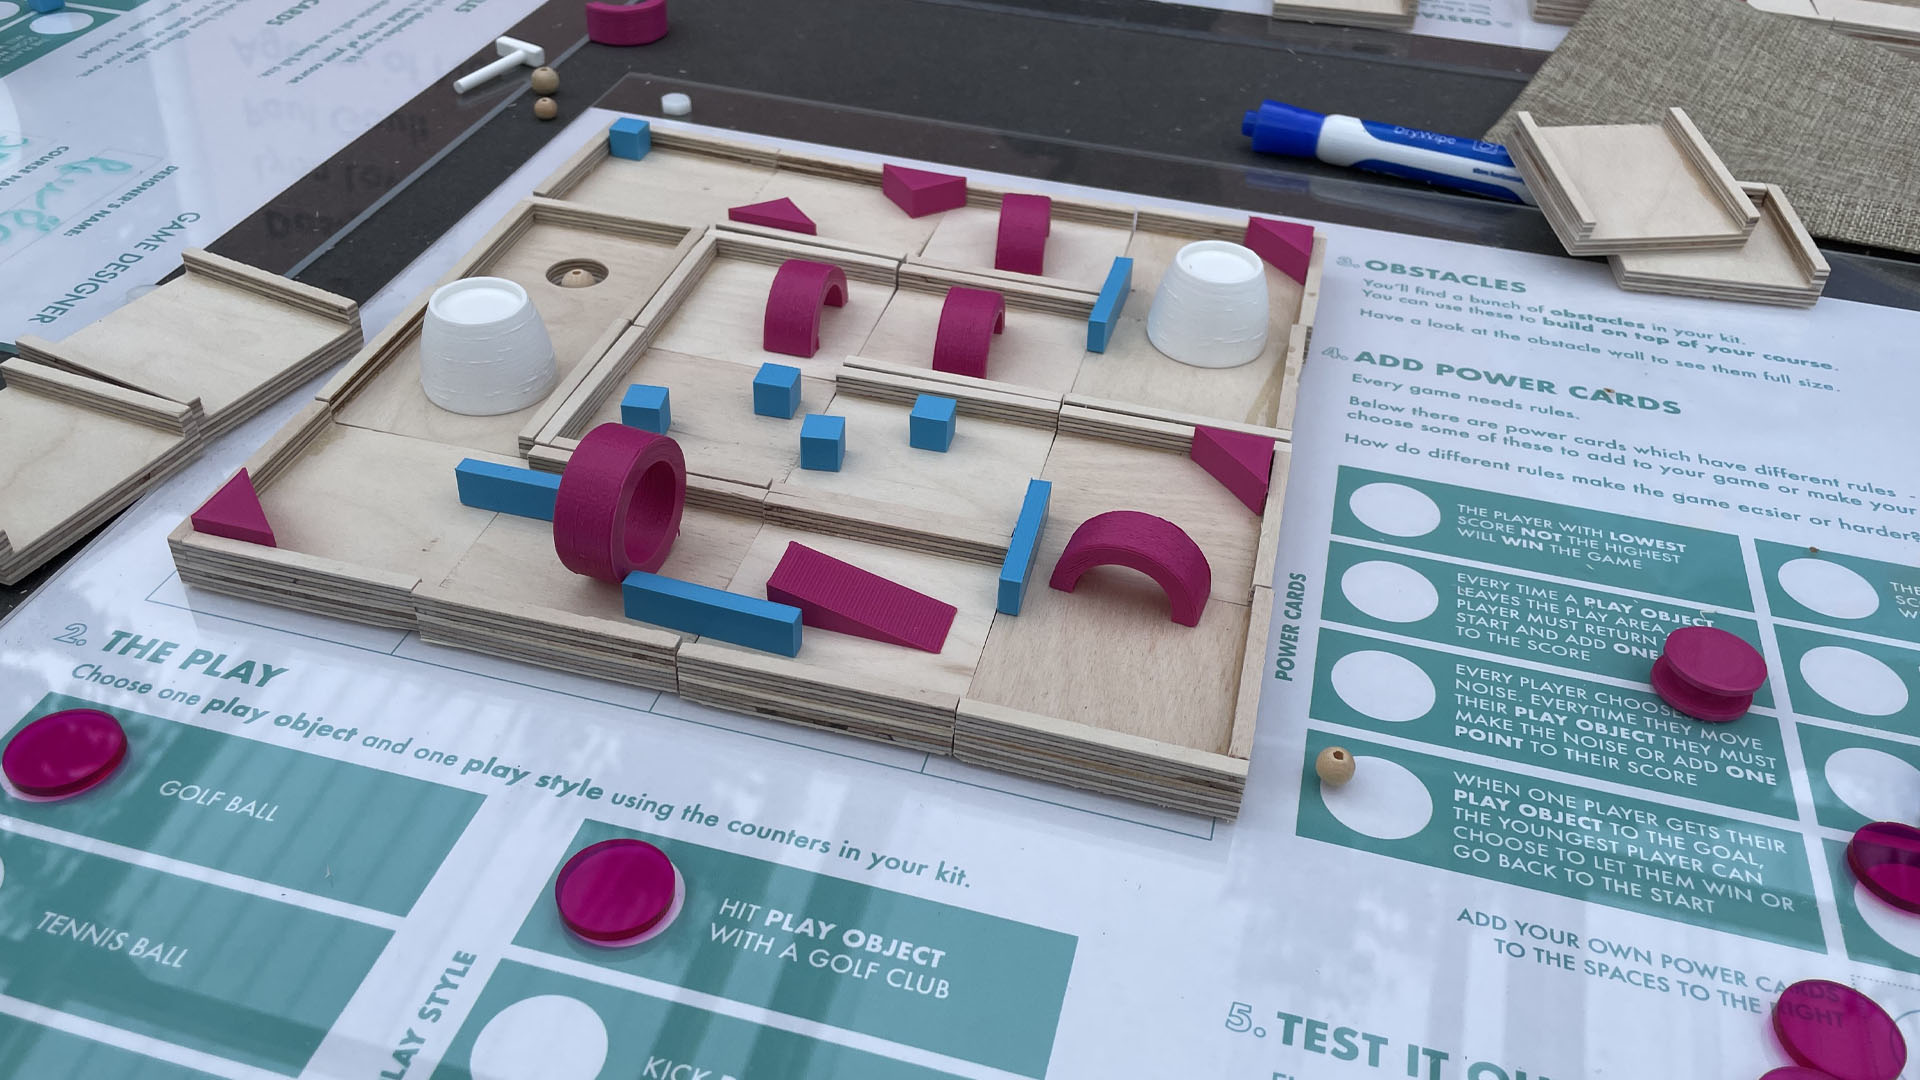 Game design tool brings creative spark to Dundee Design Festival